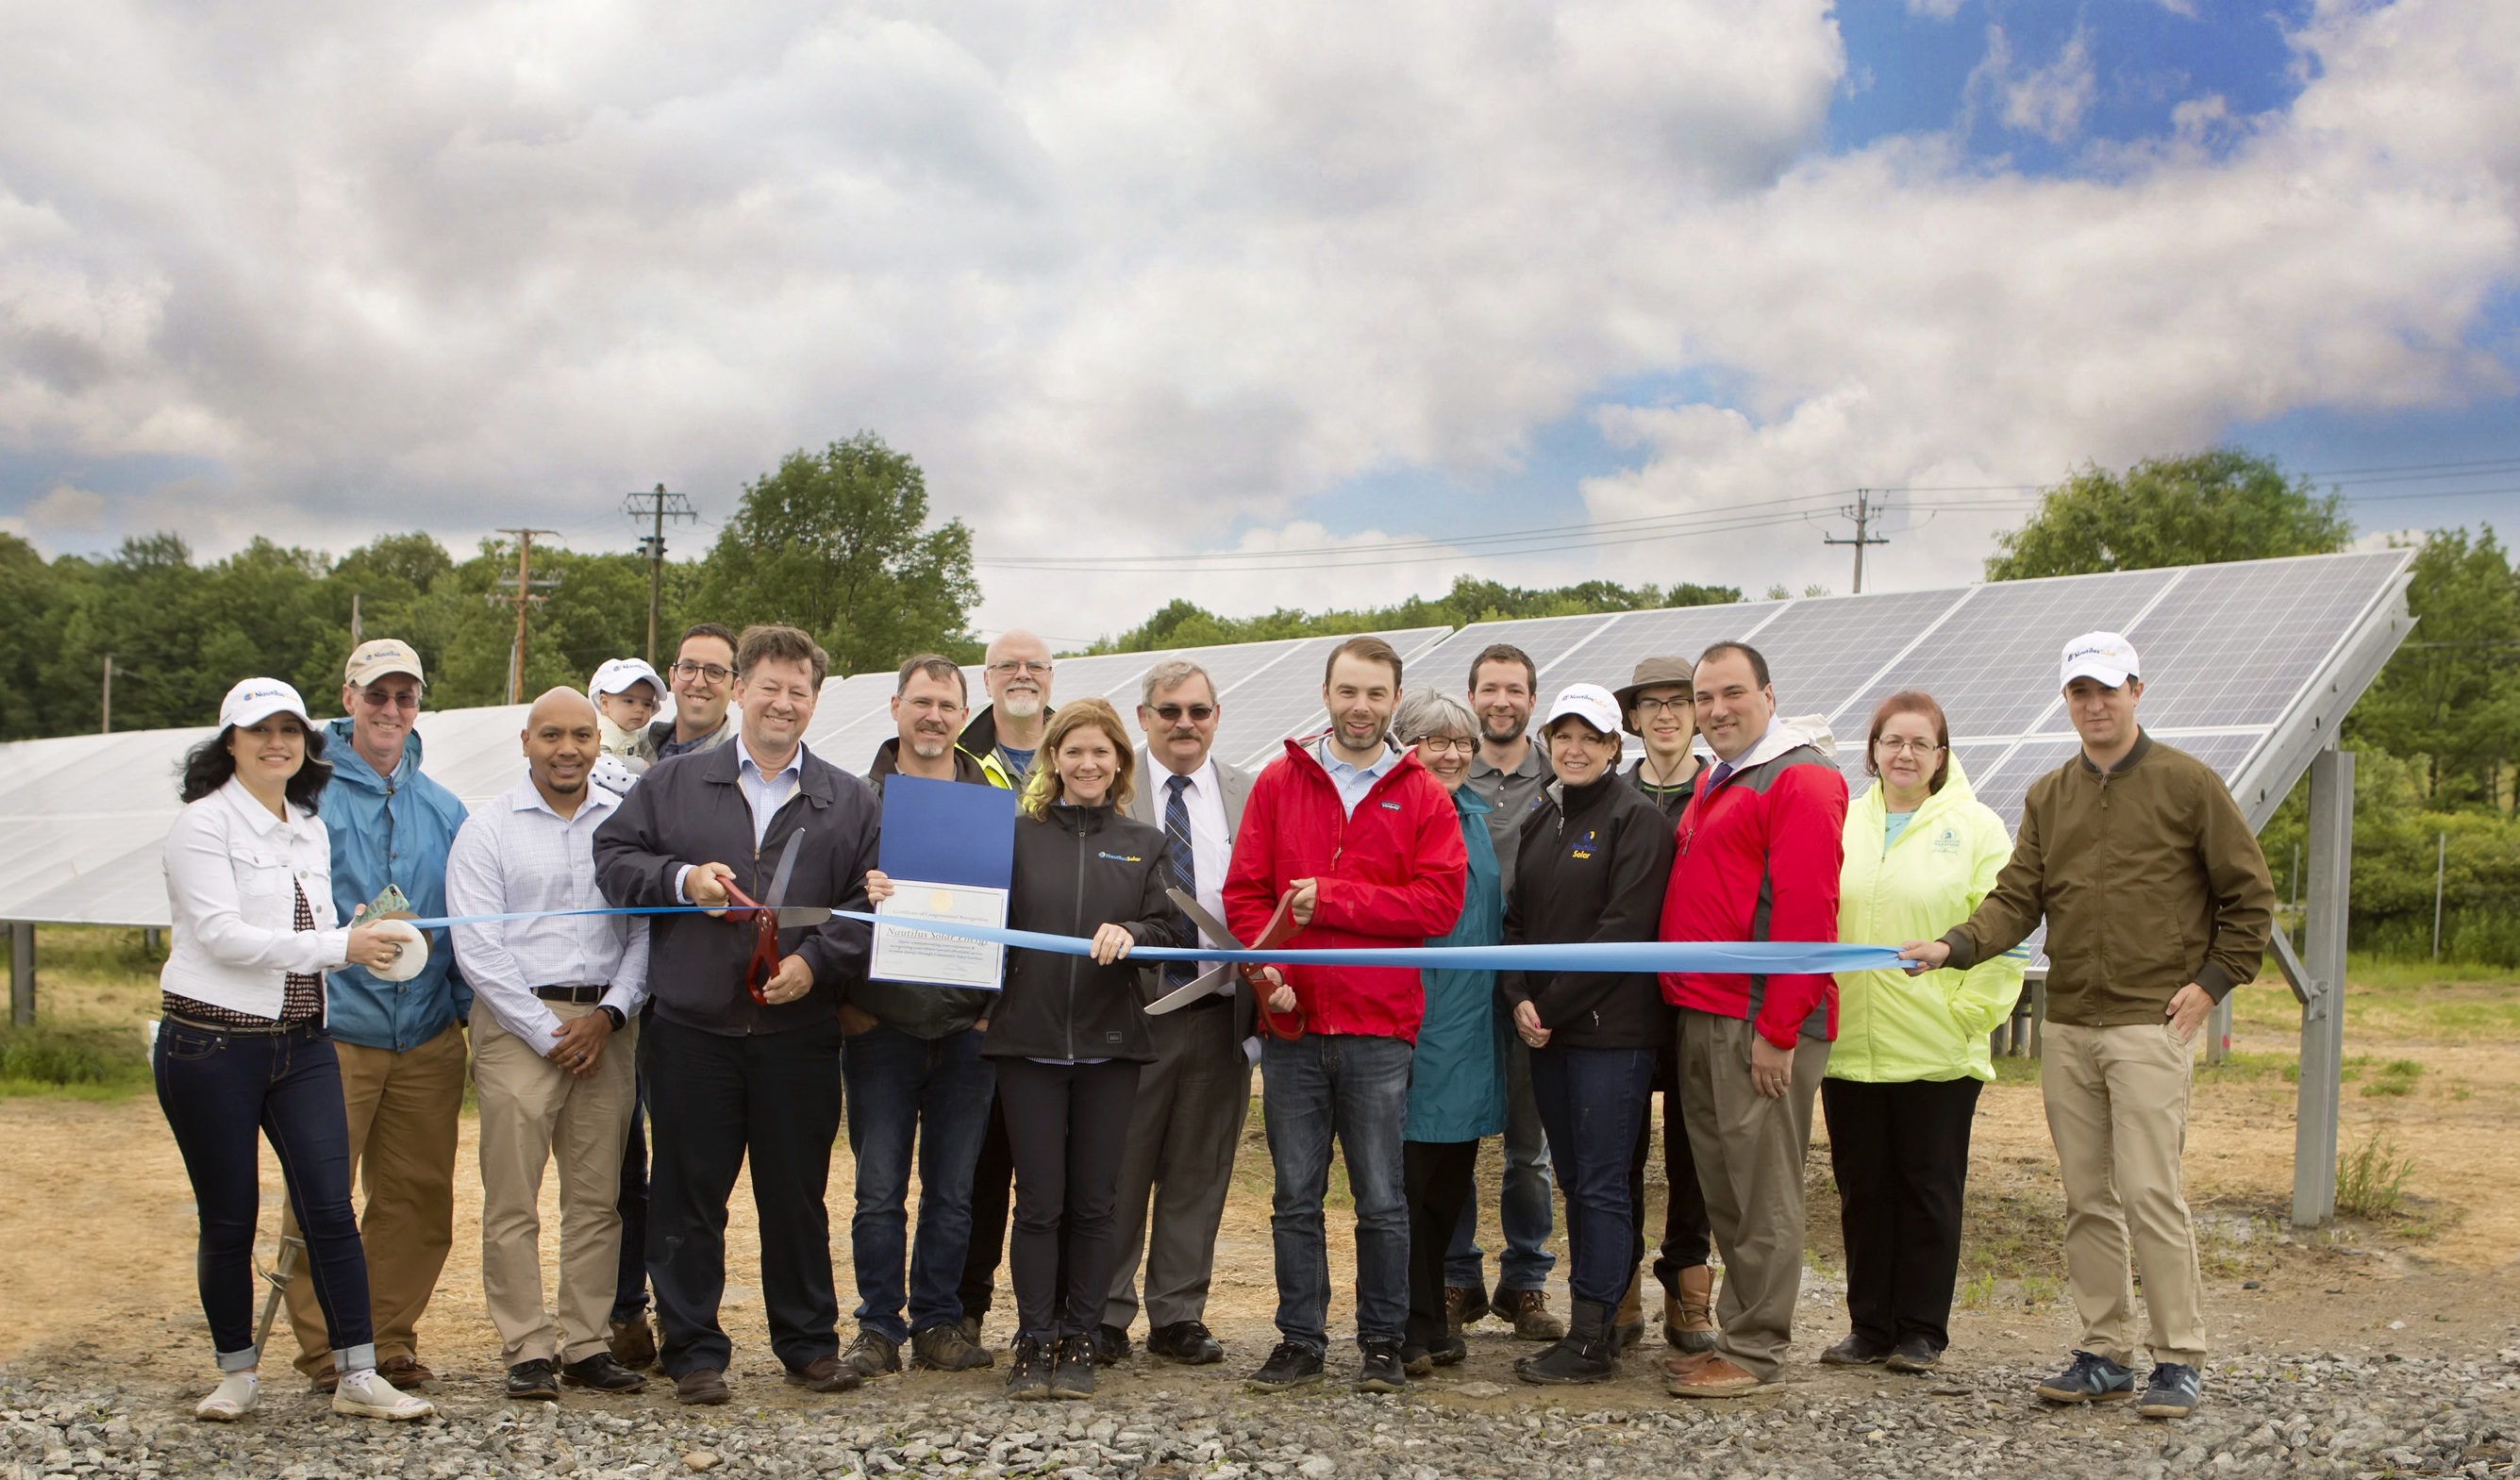 Nautilus Solar Energy Announces Completion Of Its First Community Solar Project In Orange County, New York